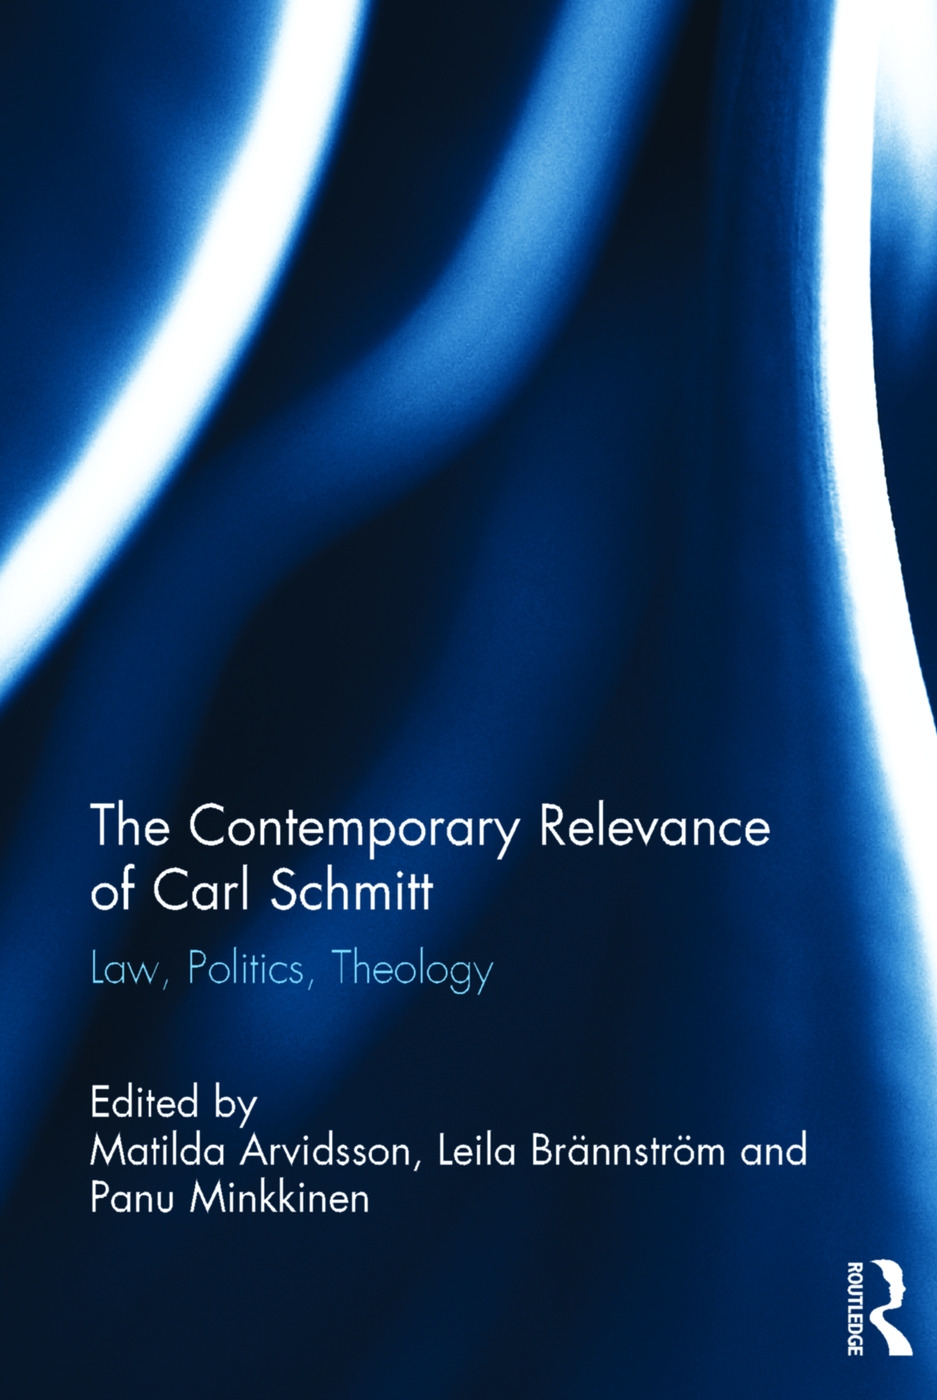 The Contemporary Relevance of Carl Schmitt: Law, Politics, Theology